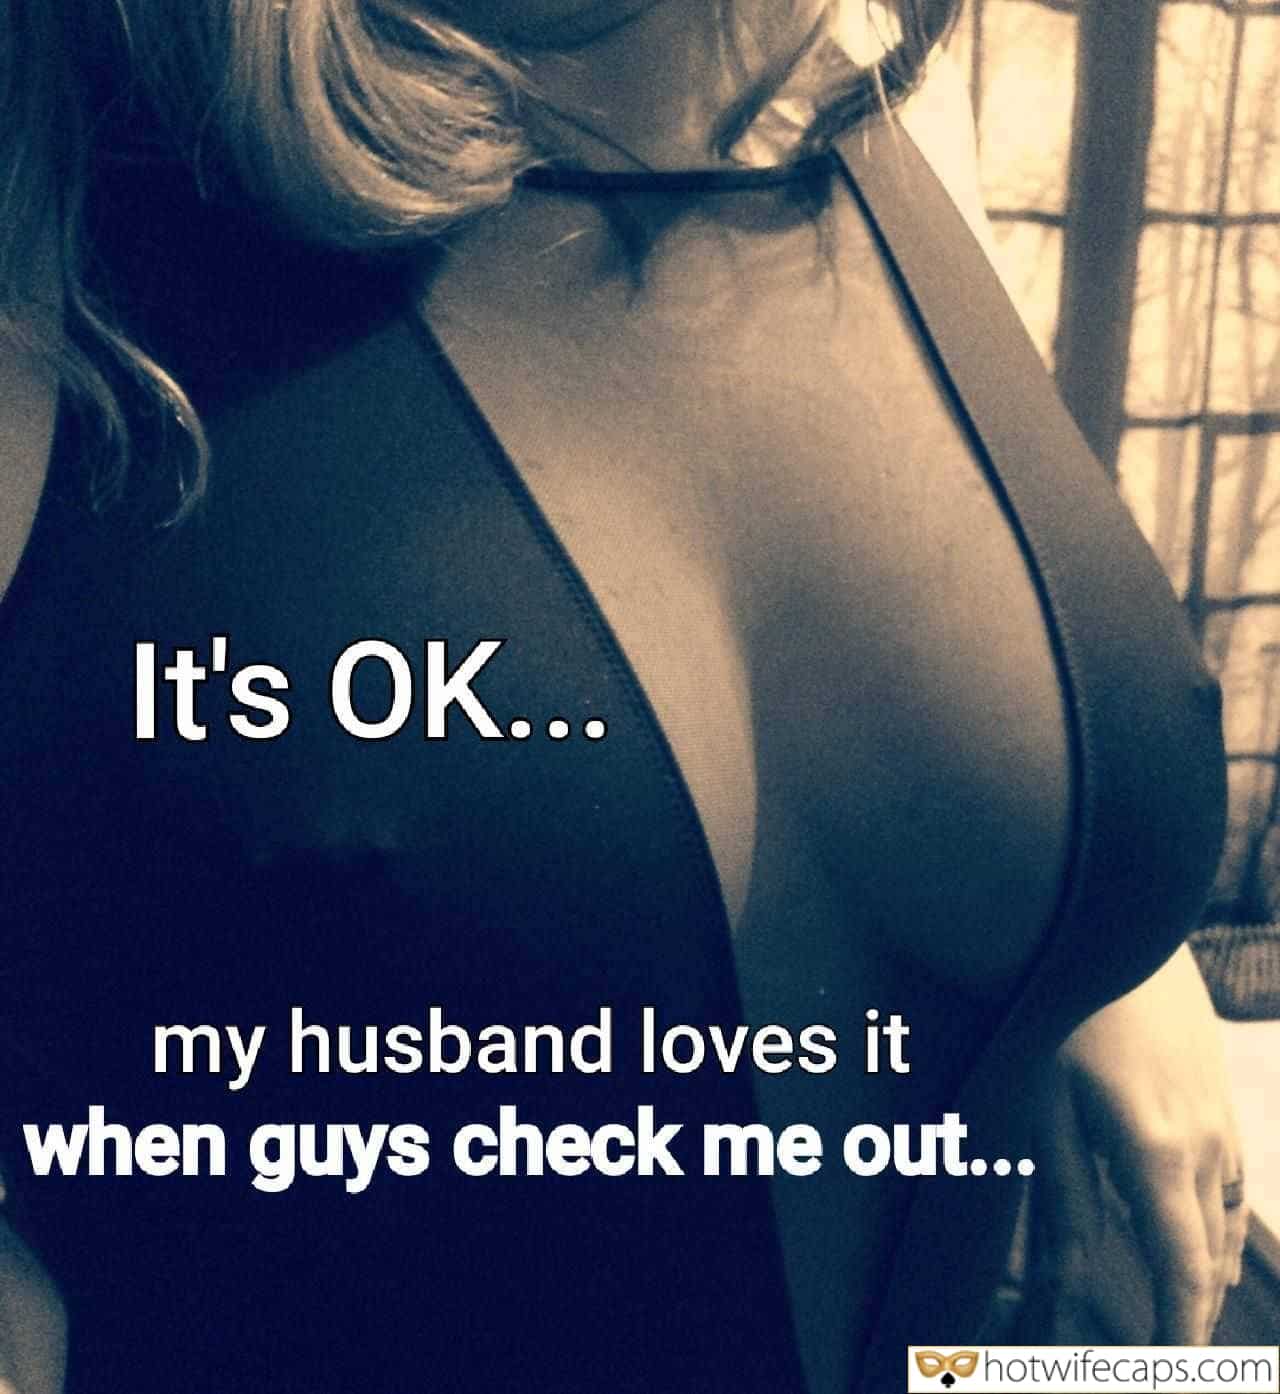 hotwife cuckold wife flashing pussy licking cheating captions hotwife caption beautiful breasts without a bra